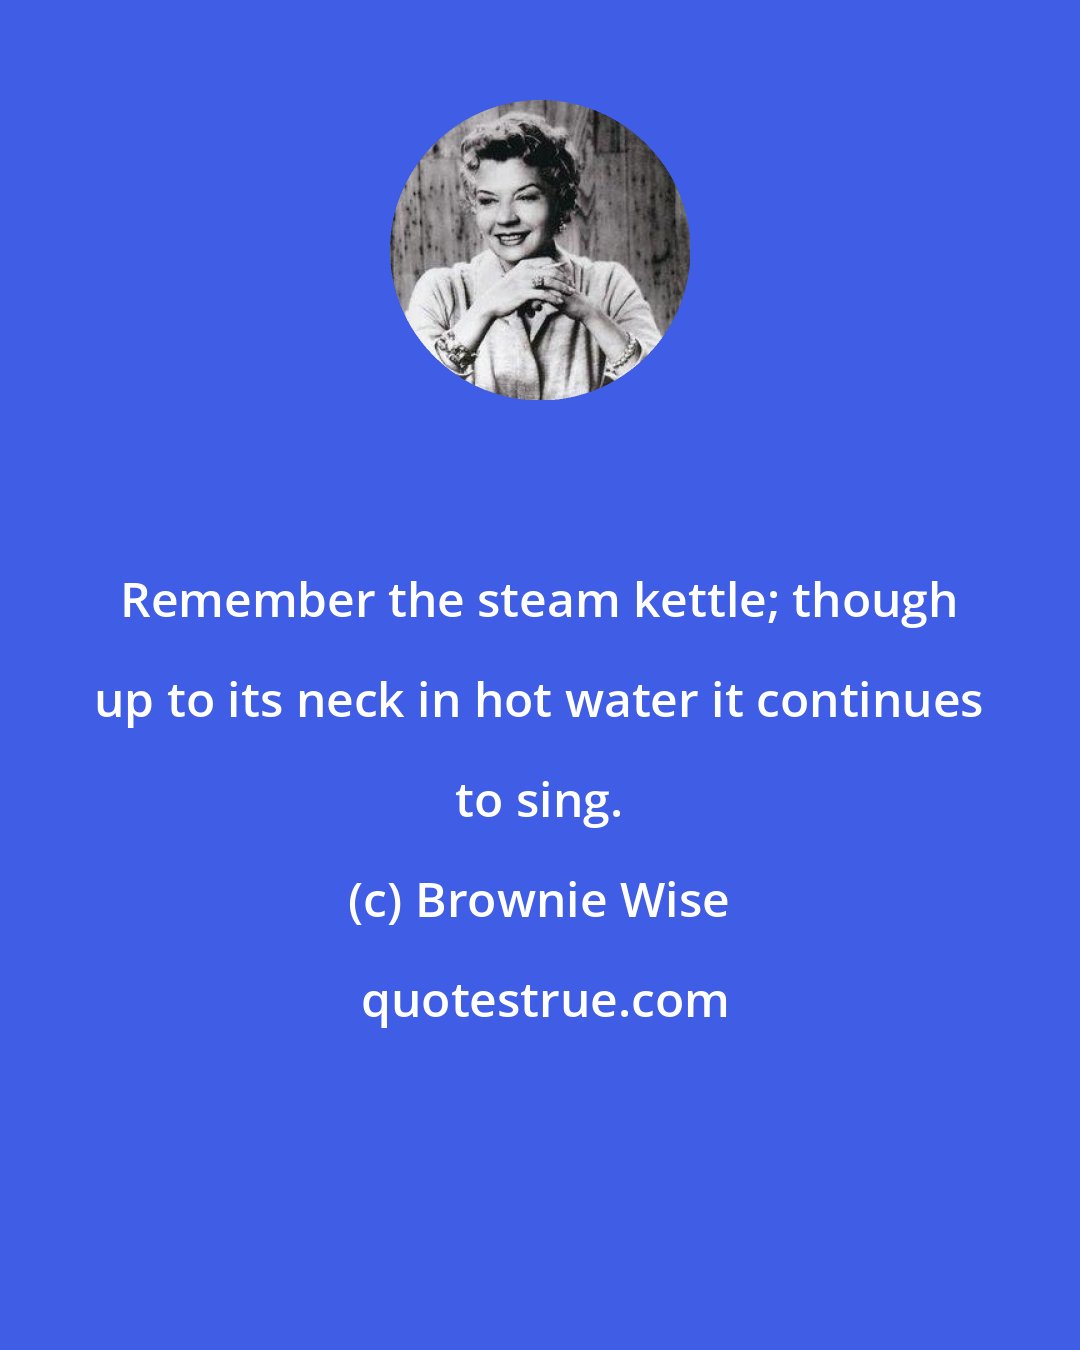 Brownie Wise: Remember the steam kettle; though up to its neck in hot water it continues to sing.